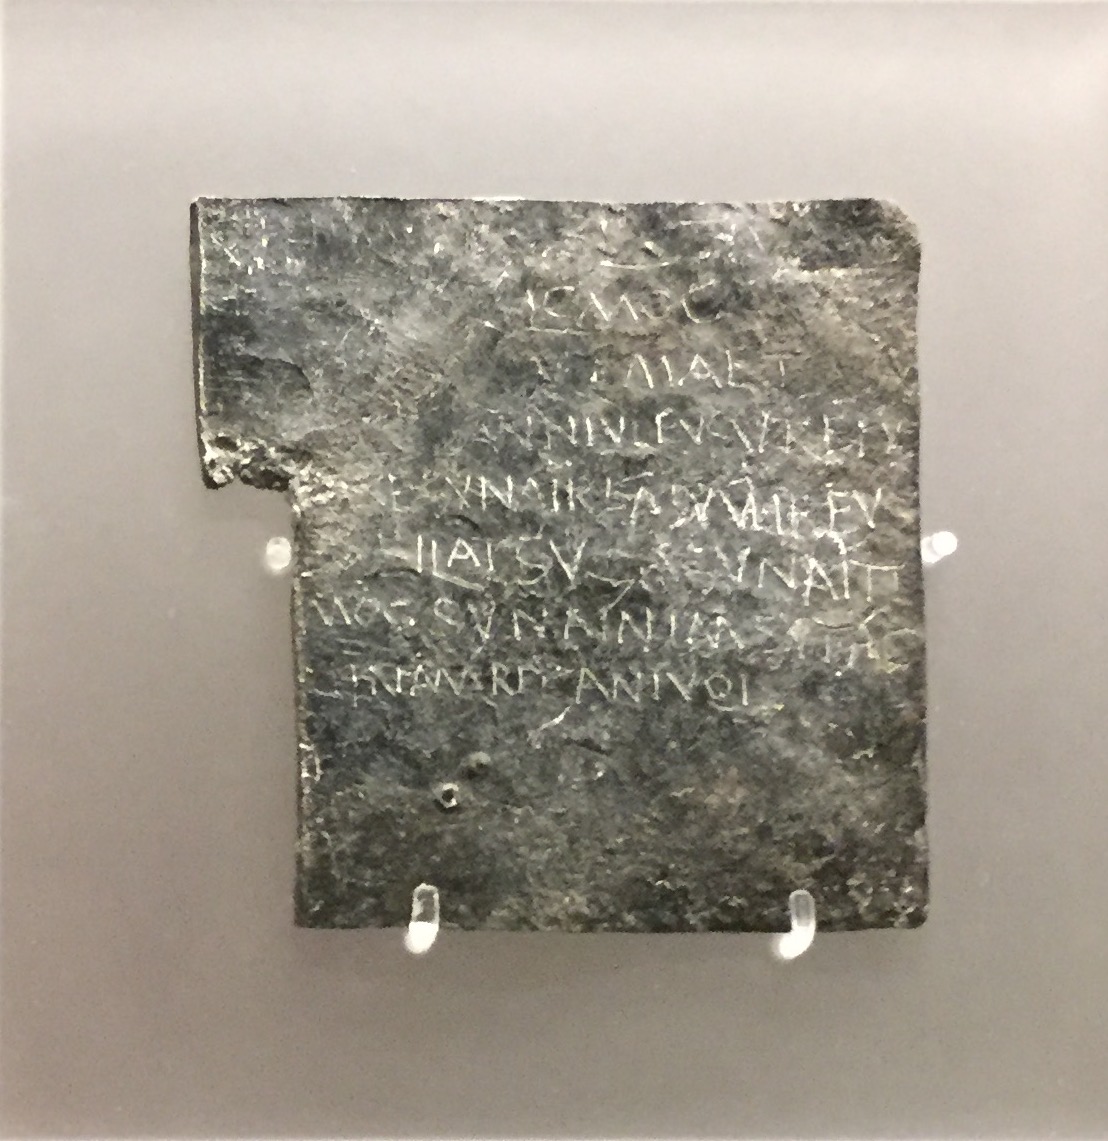  A rare complete and legible curse tablet 